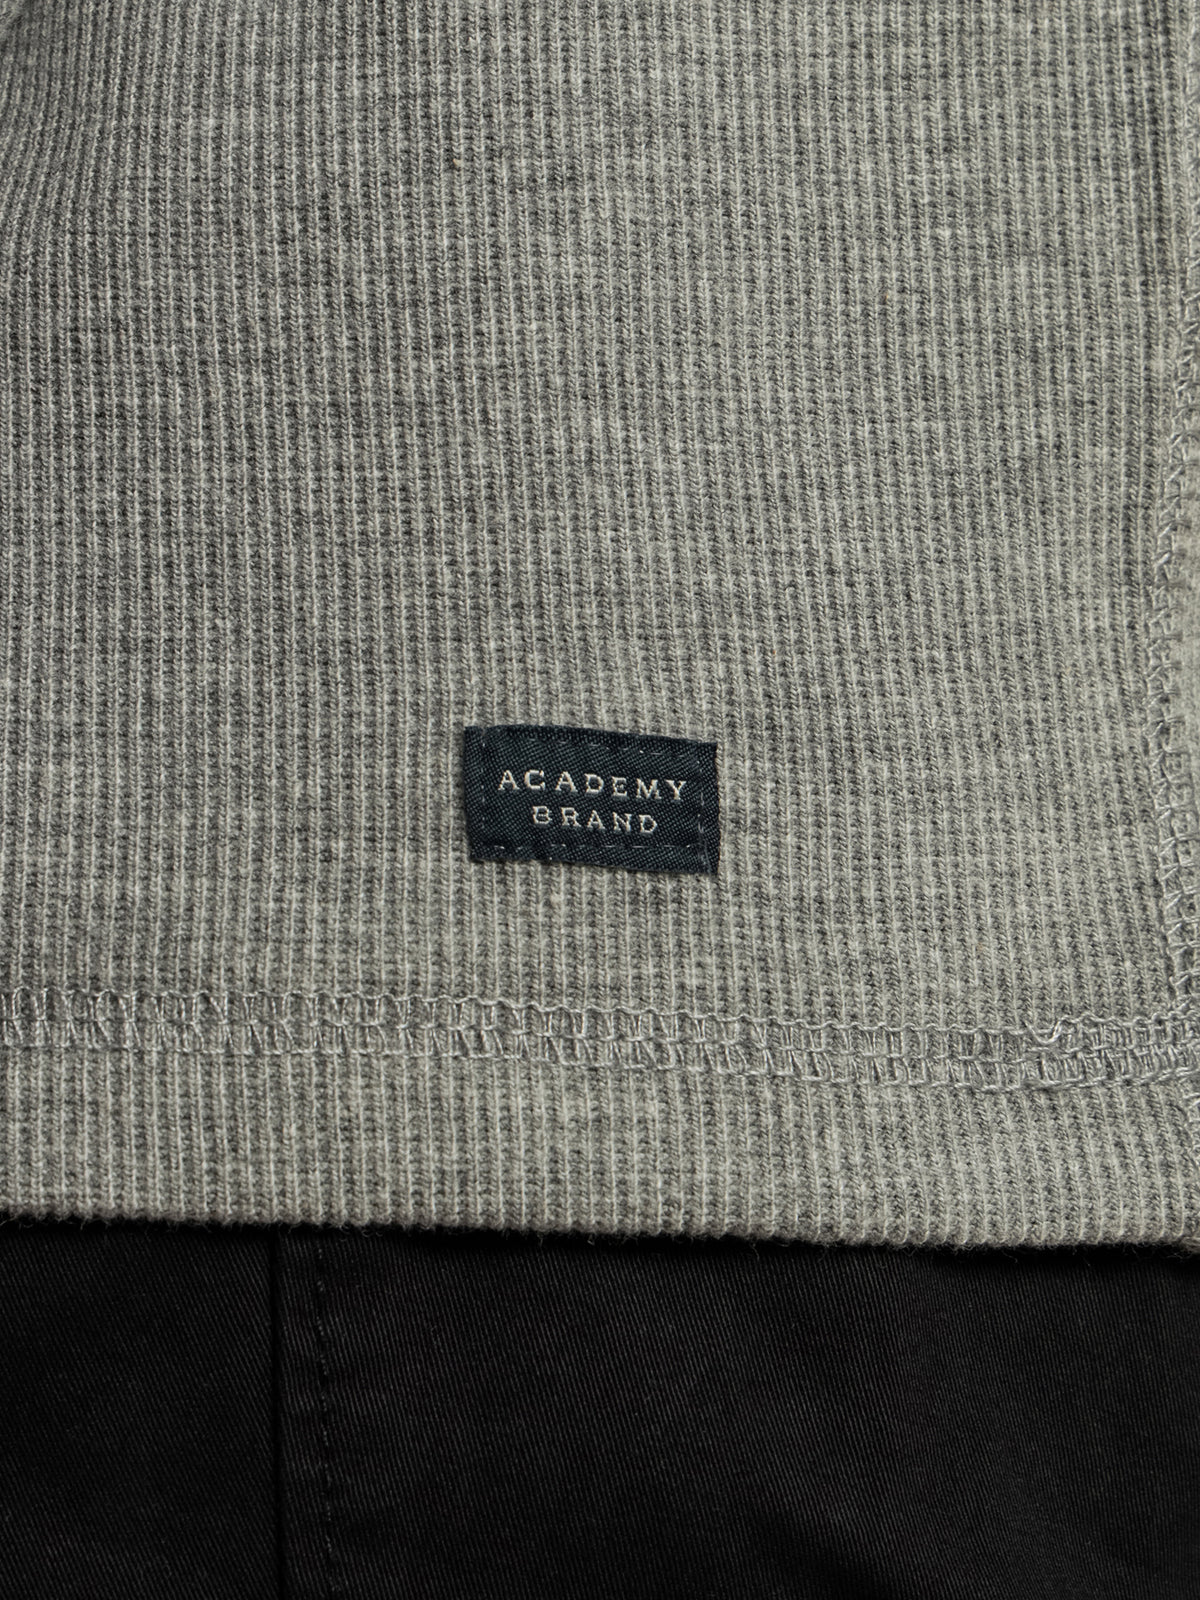 Workers Crew in Grey Marle